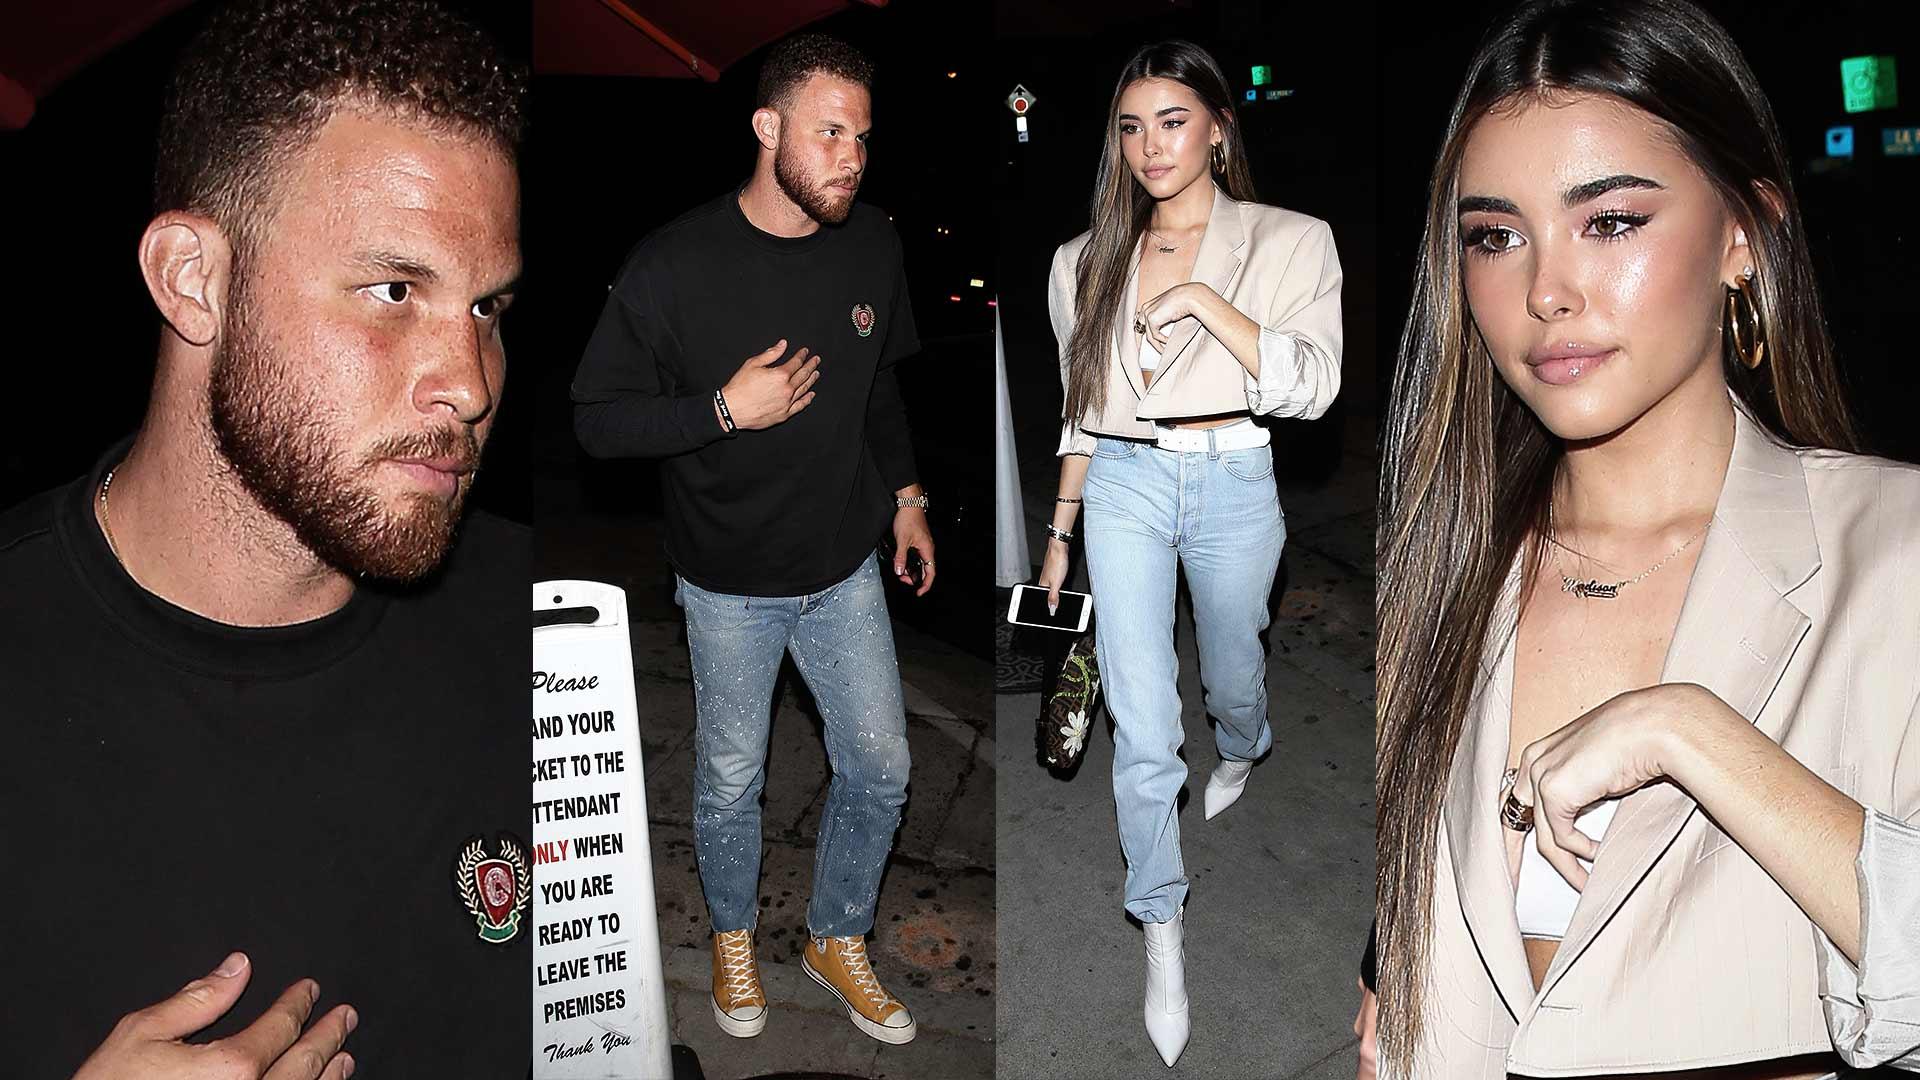 Blake Griffin and Madison Beer Spark Romance Rumors After Dinner Date